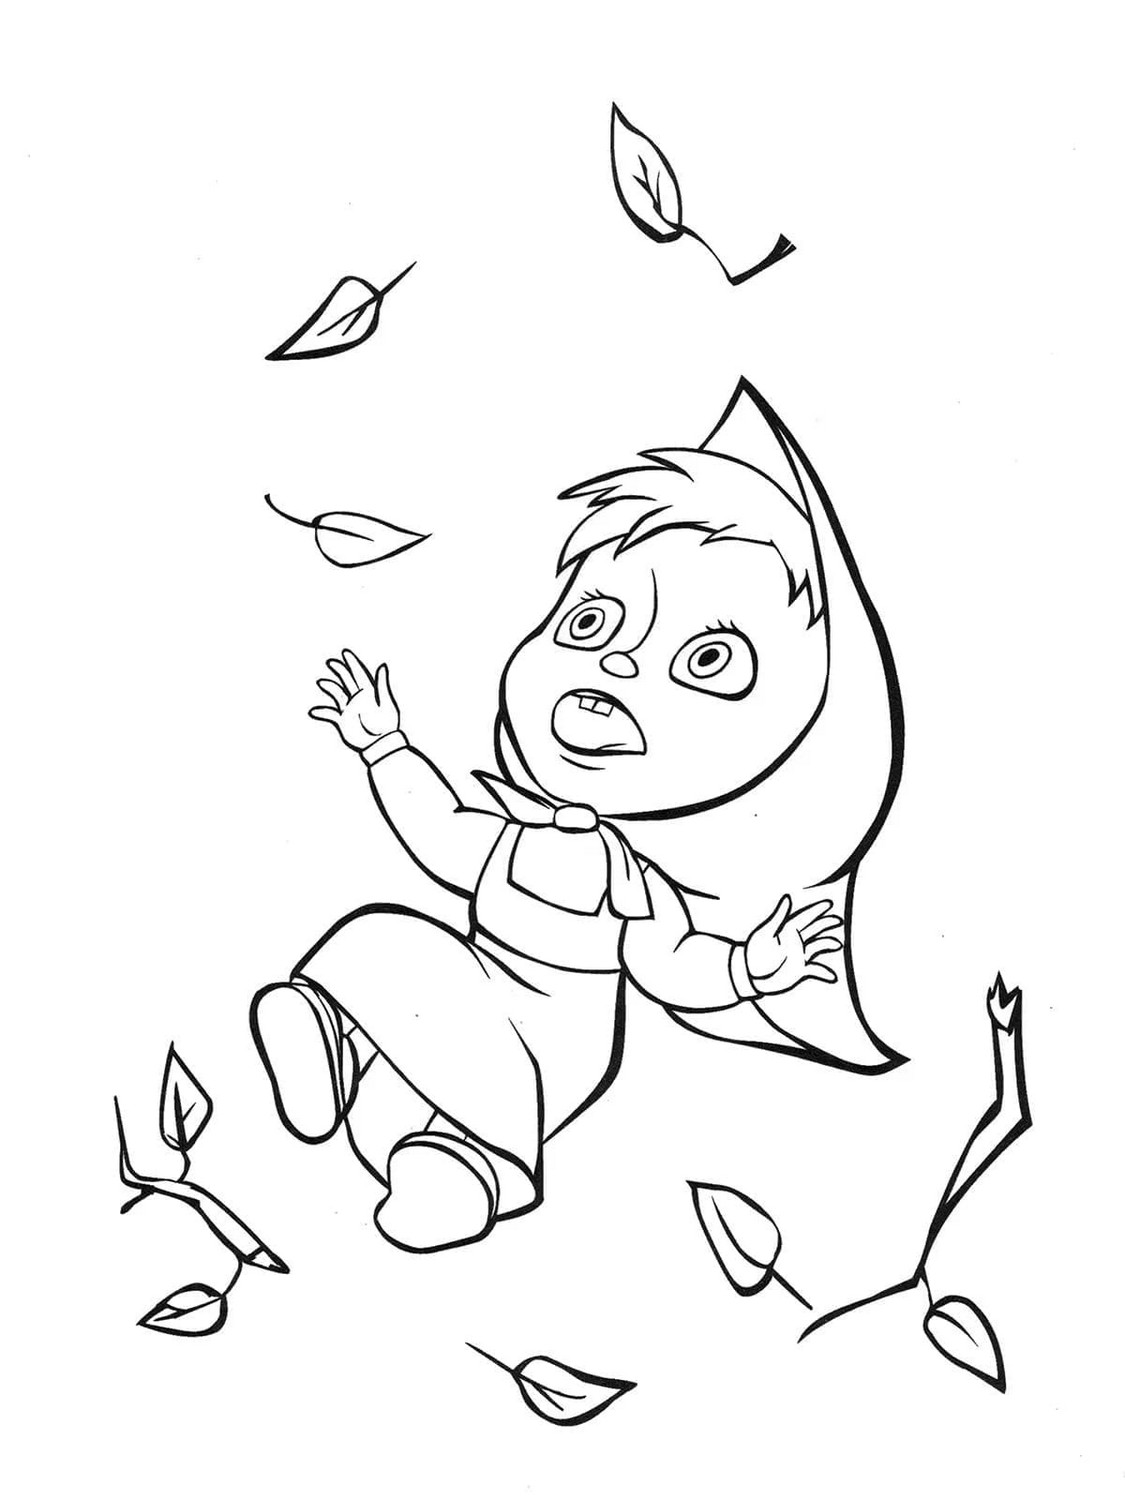 Masha and the Bear 91 drawing from Masha and the Bear to print and color